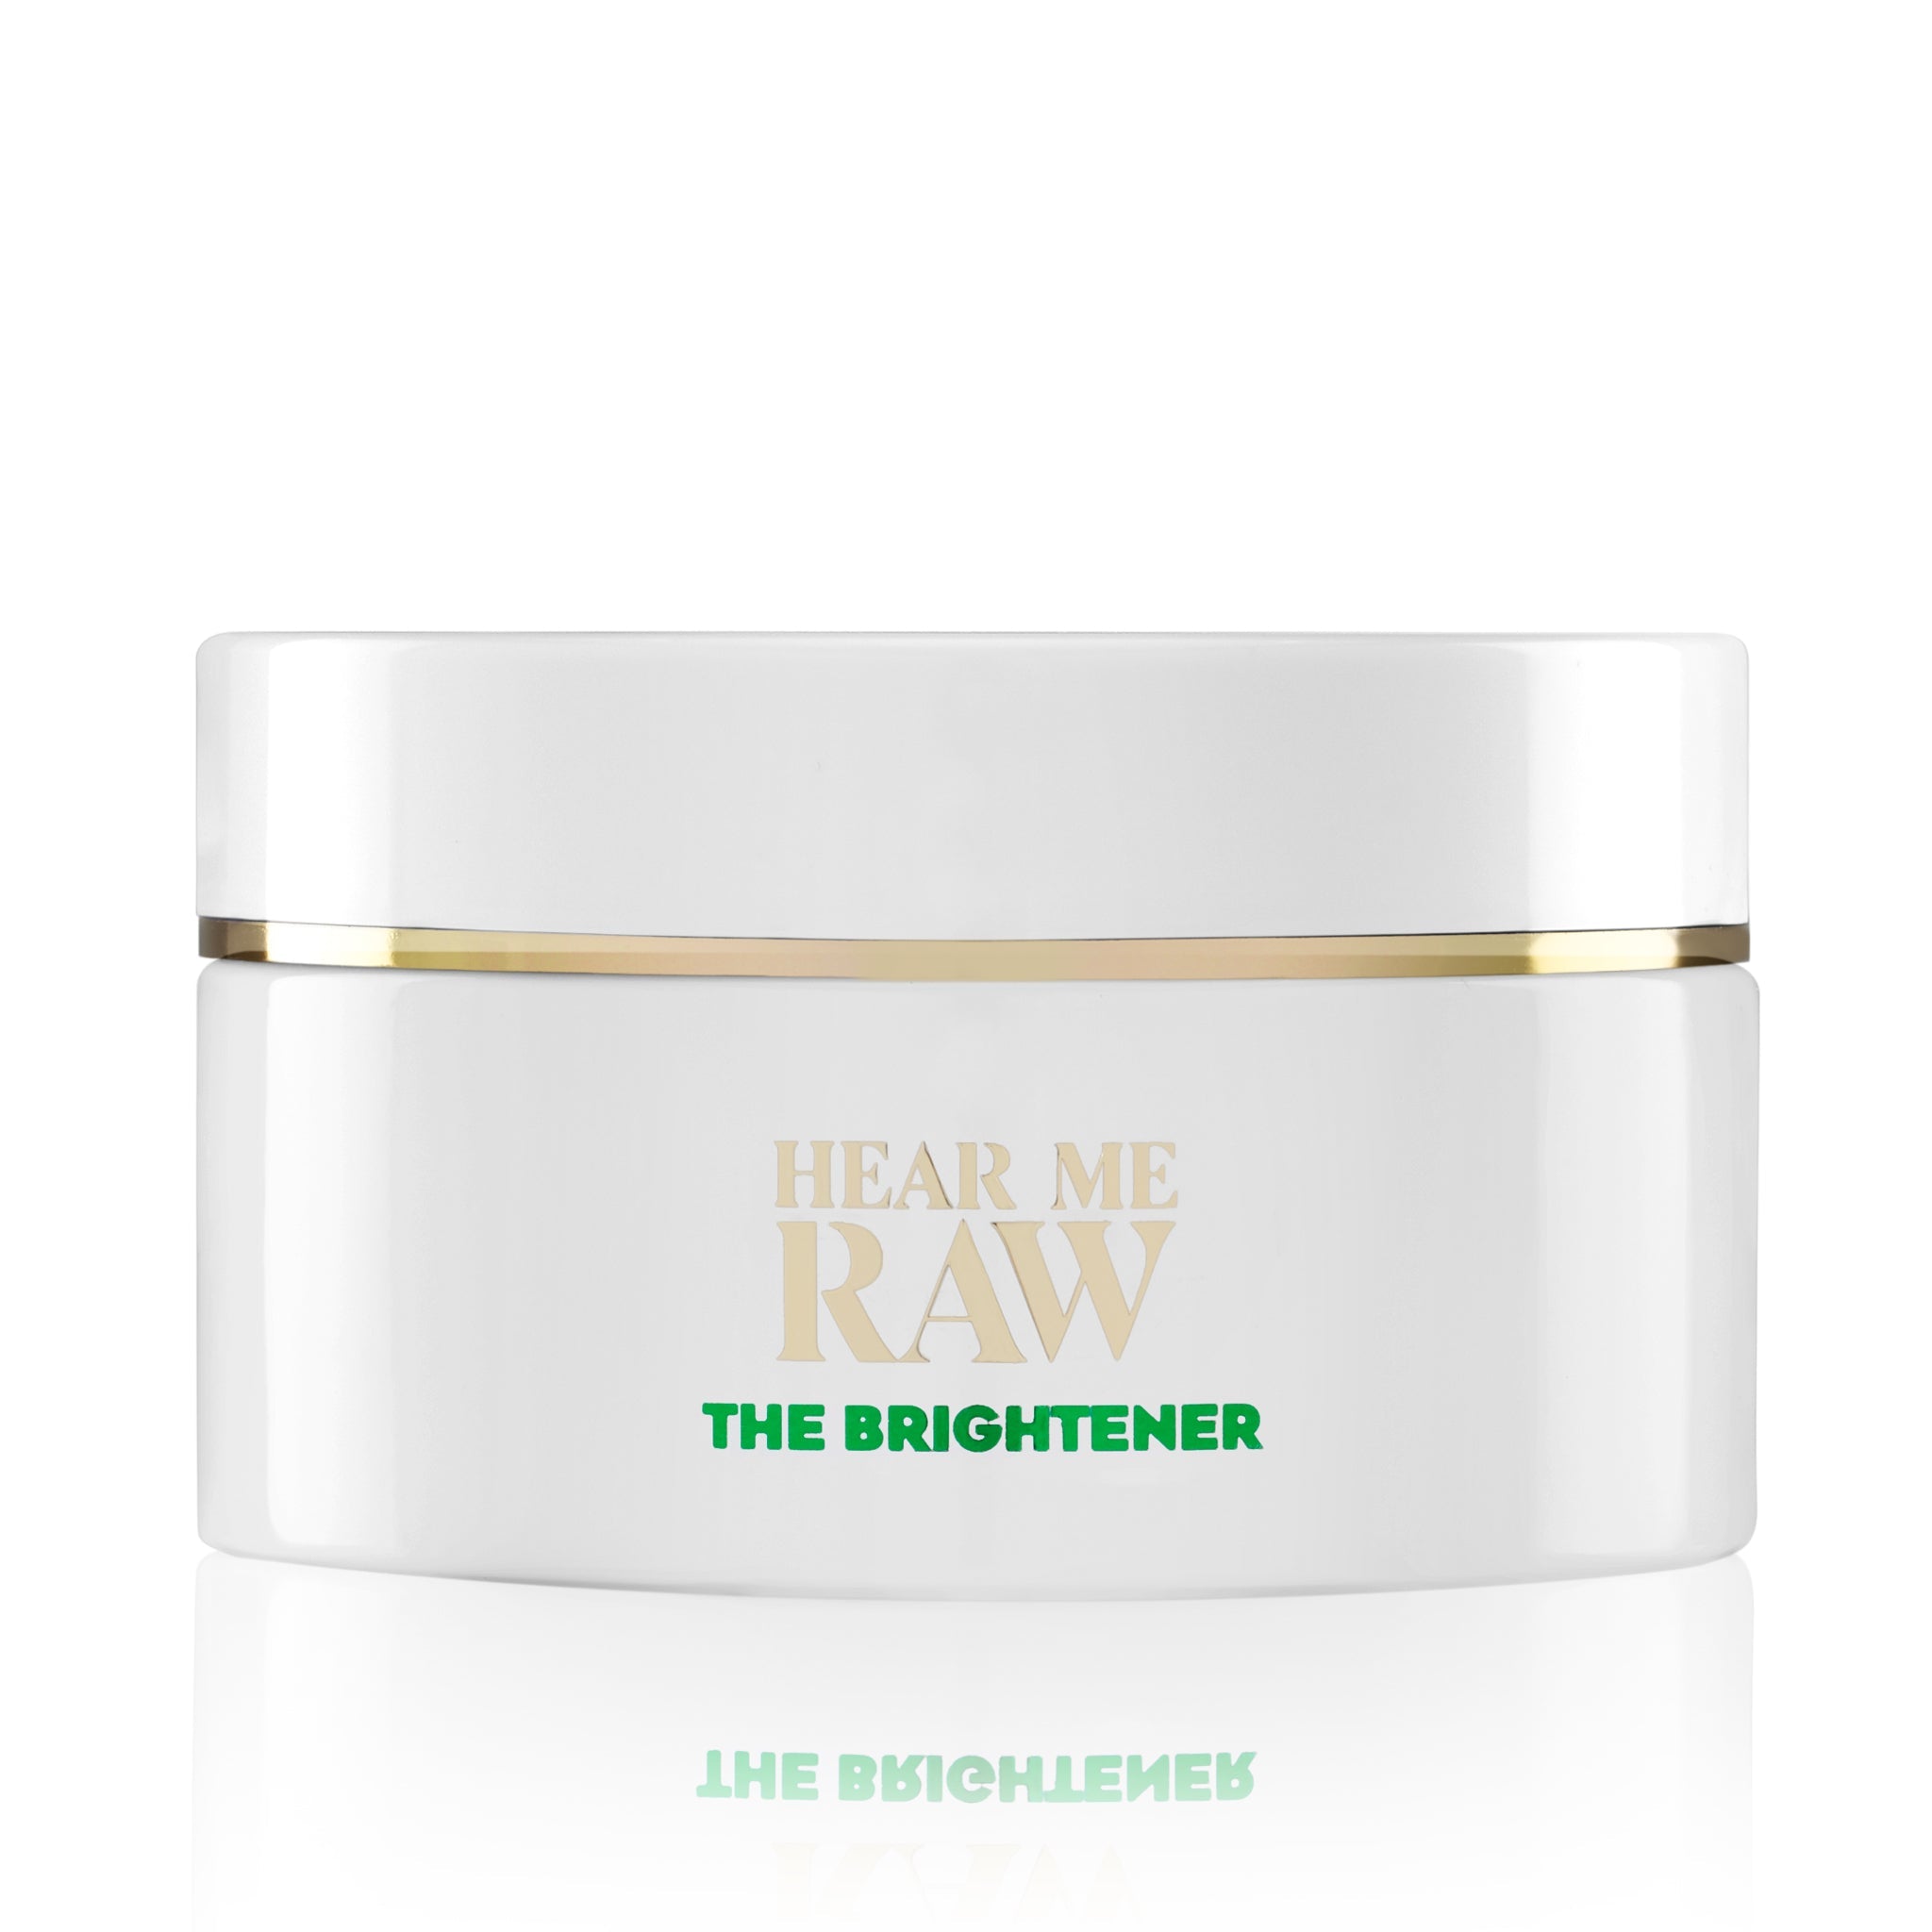 HEAR ME RAW x Fred Segal The Brightener radiance mask front